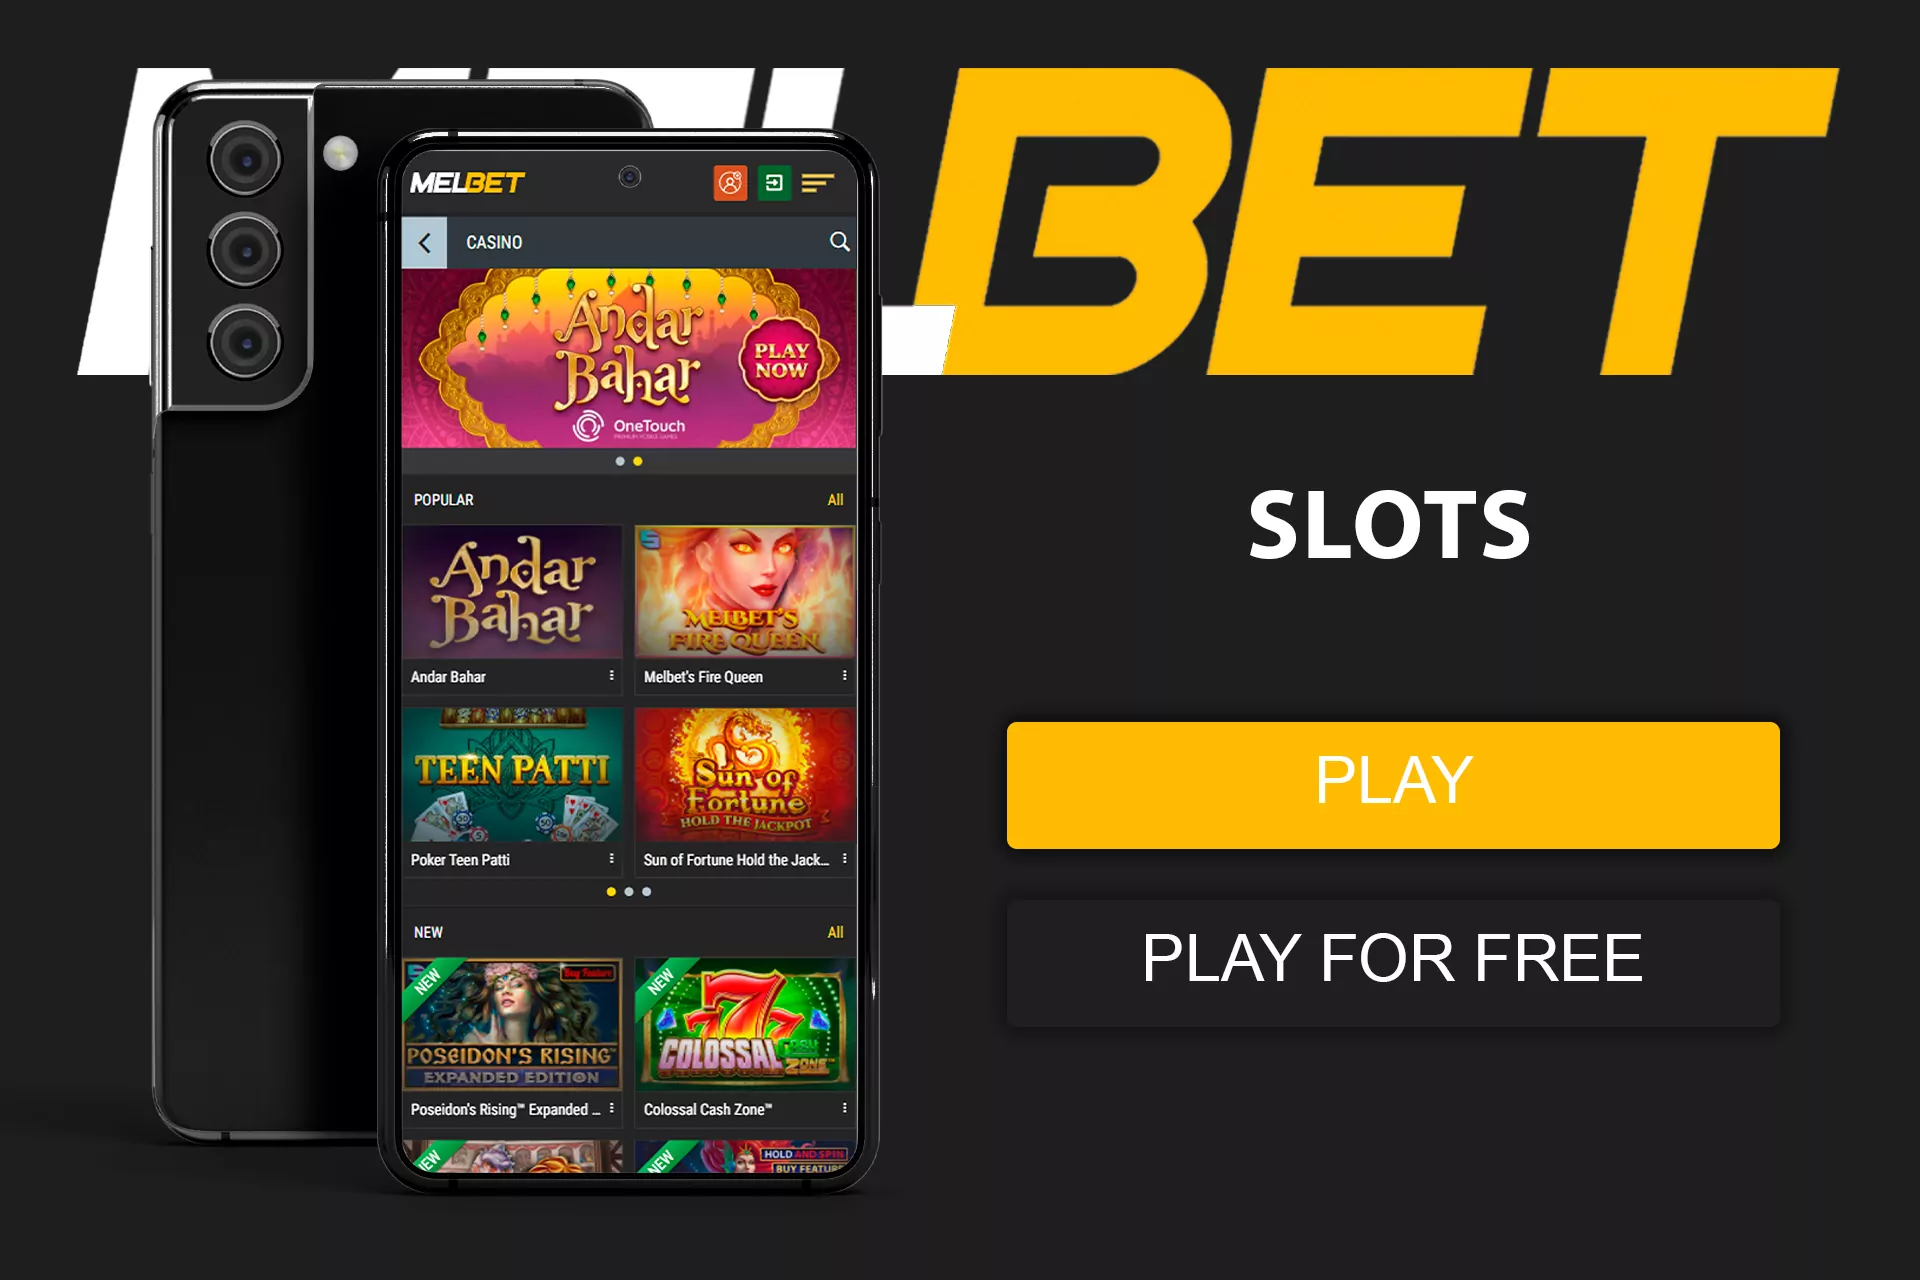 There are lots of slots you can find and play at Melbet Online Casino.